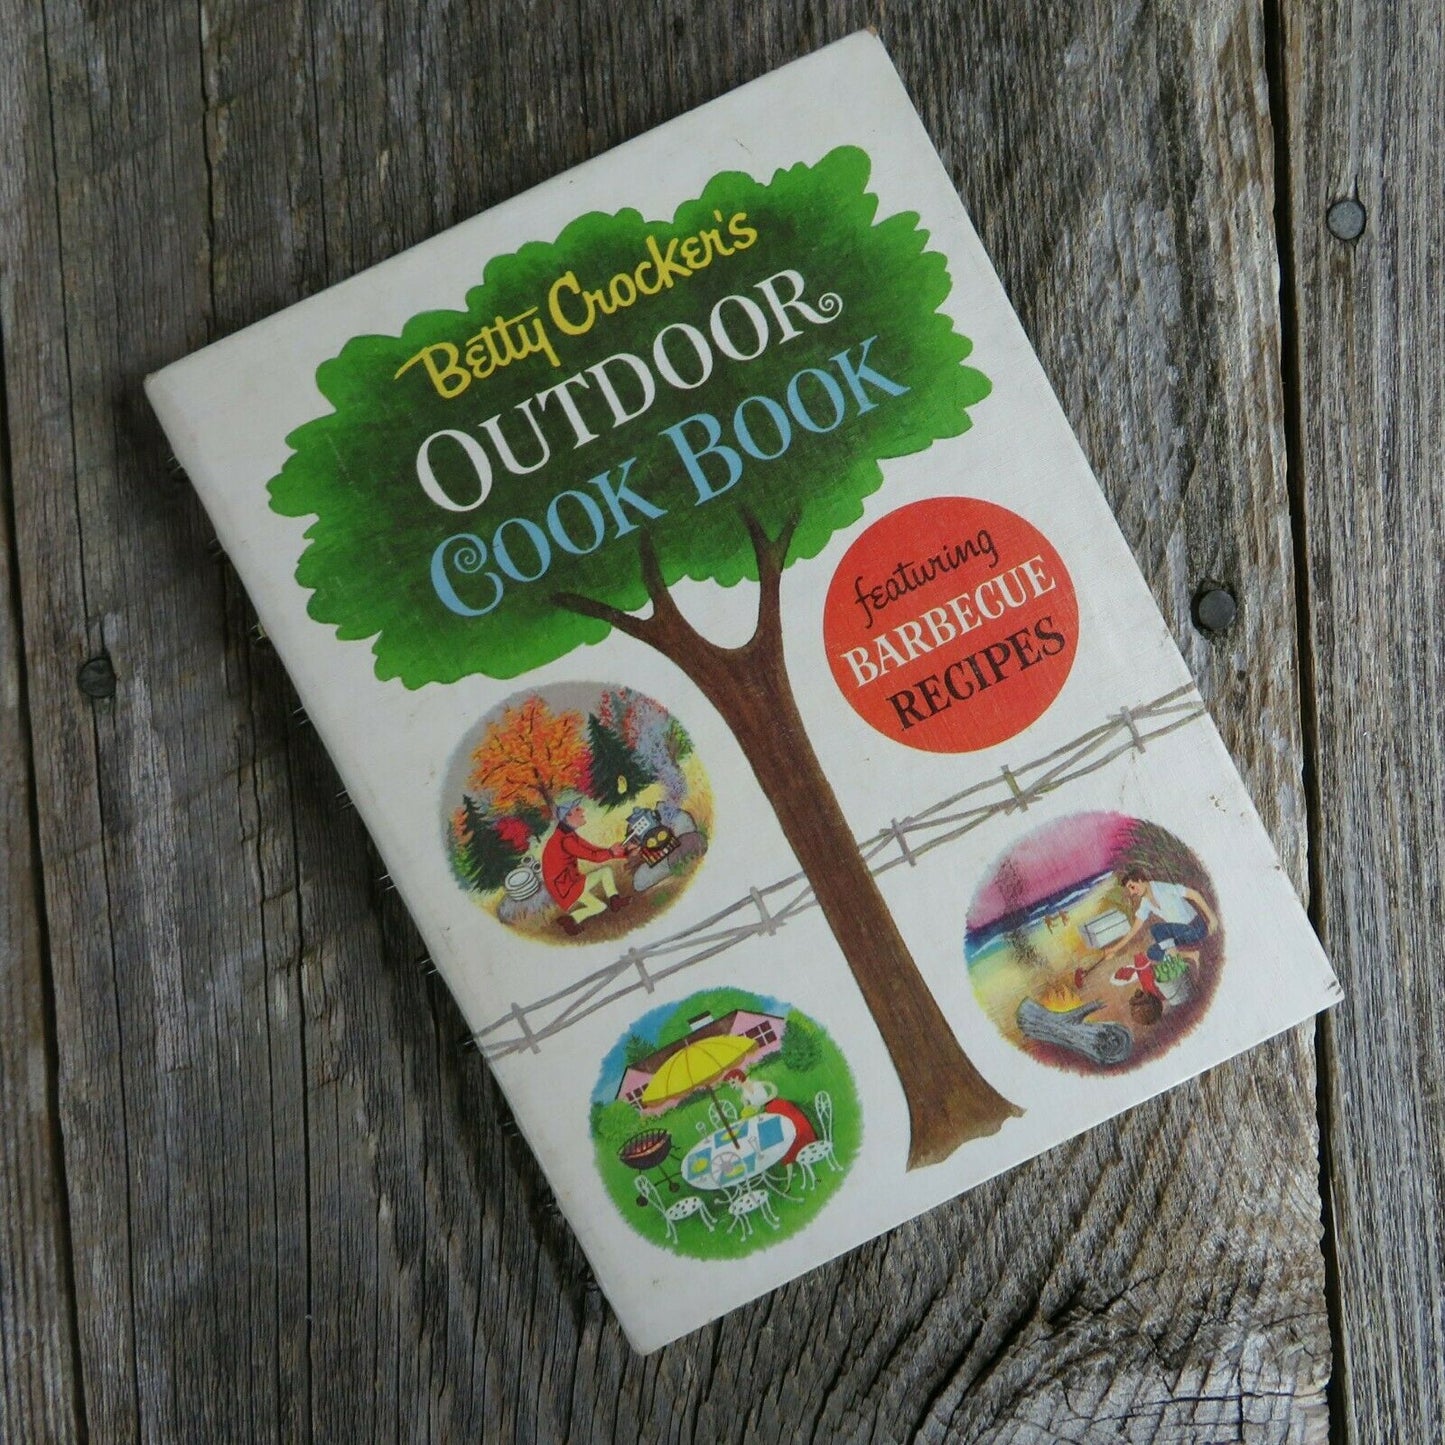 Vintage Cookbook Betty Crocker Outdoor First Edition Third Printing 1961 BBQ - At Grandma's Table